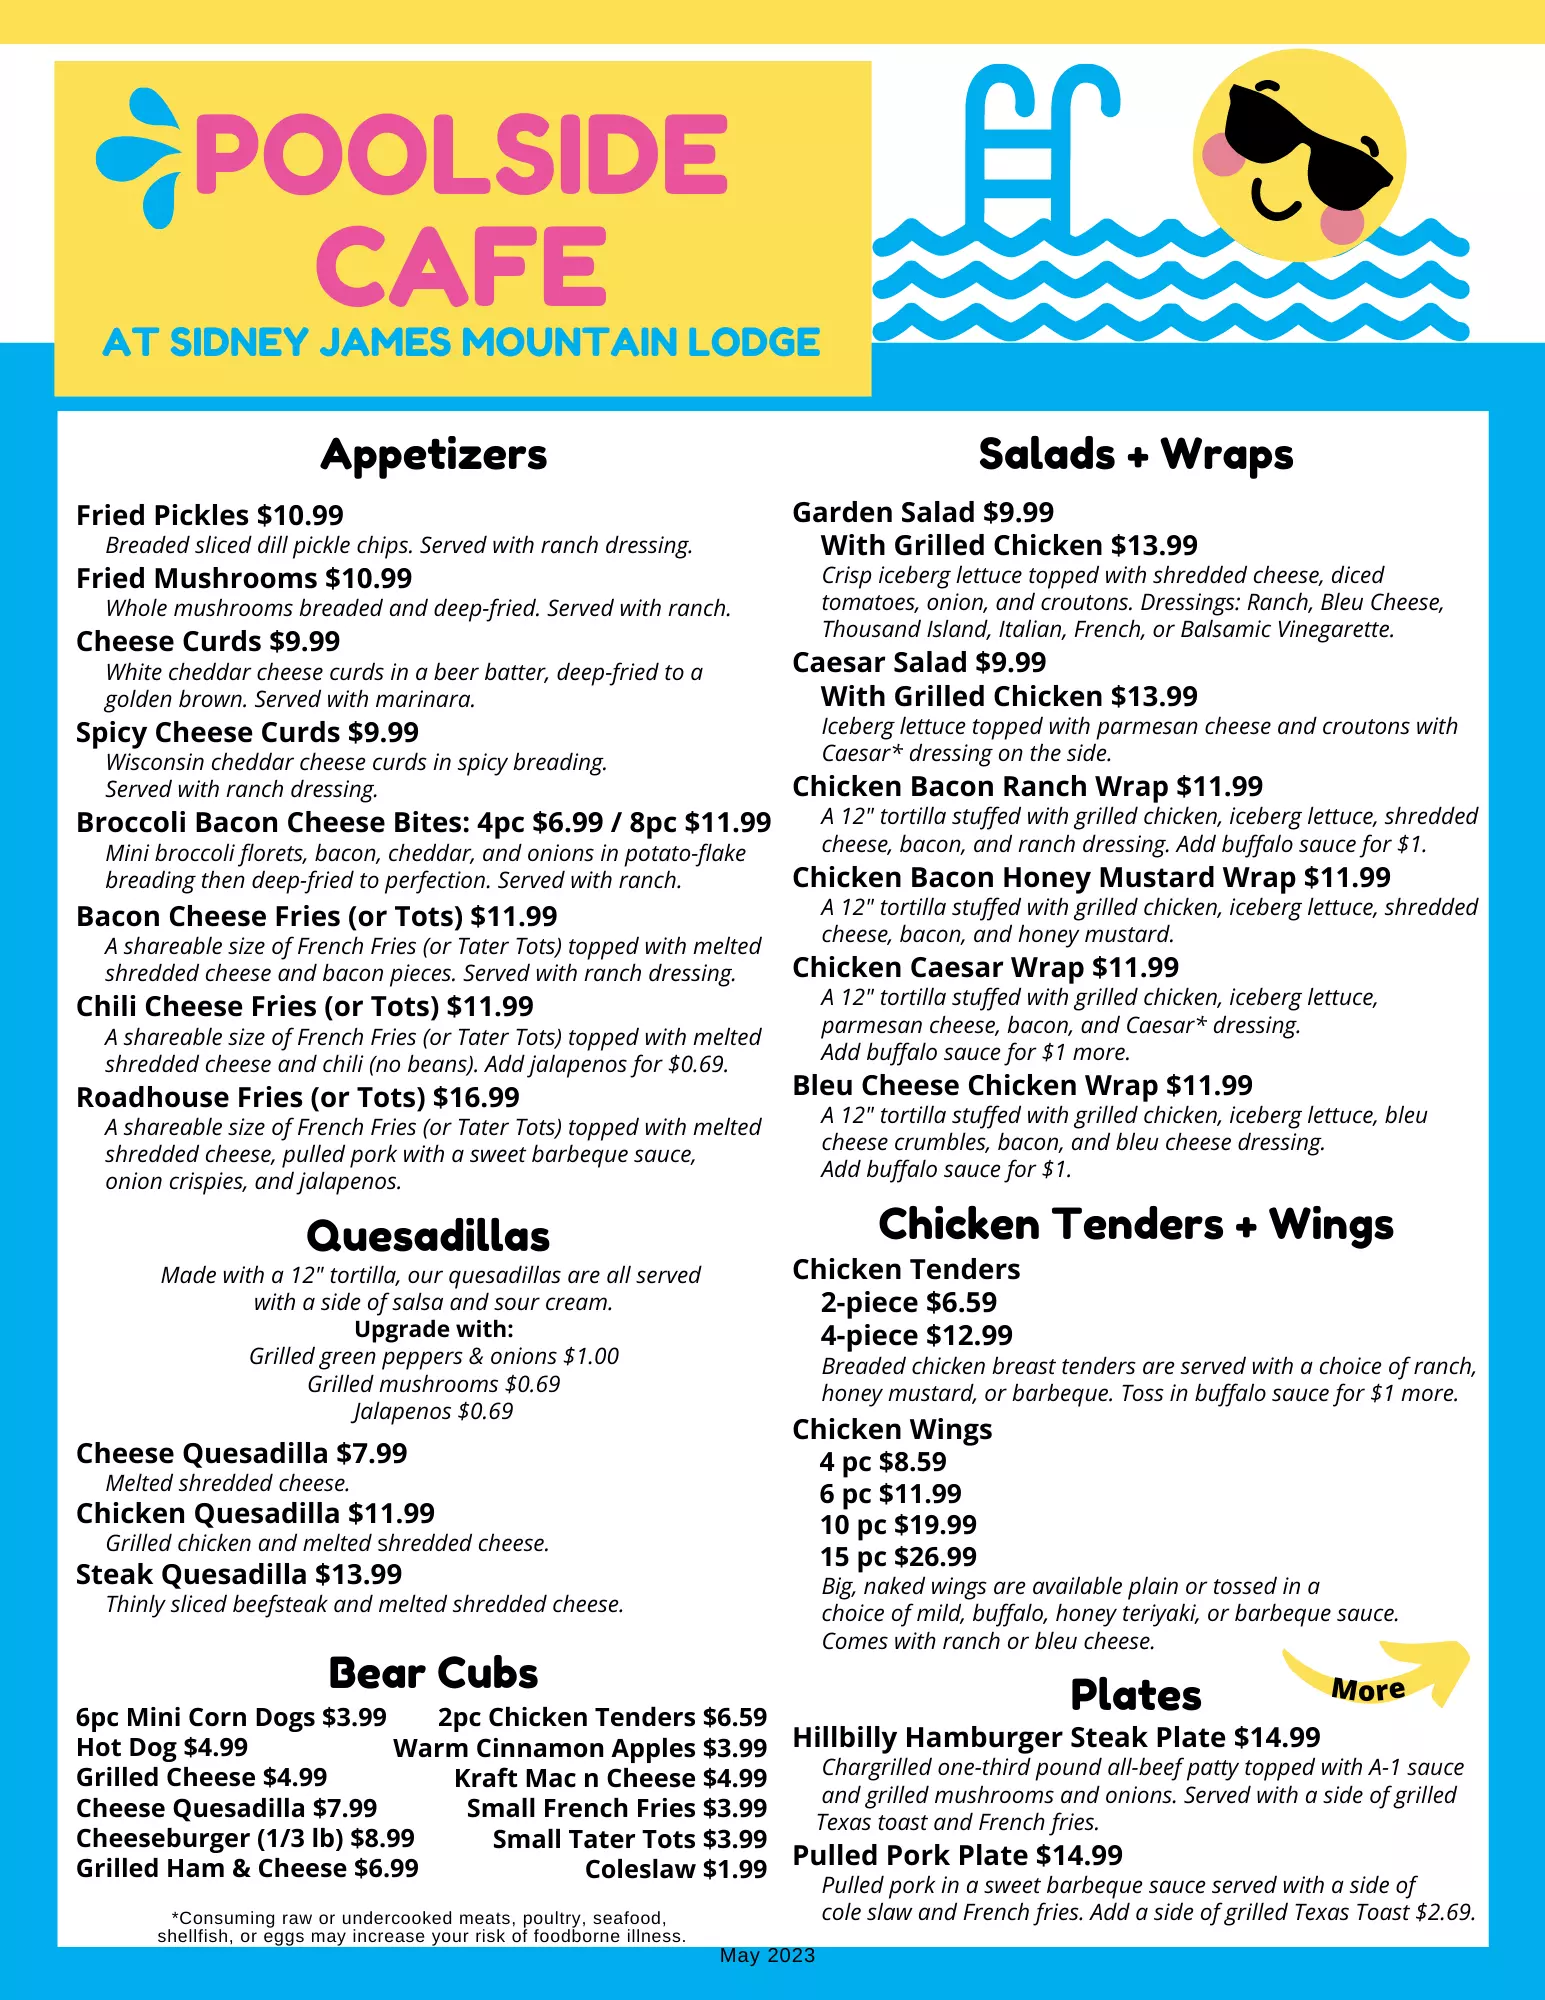 Poolside Cafe New Lunch and Dinner Menu